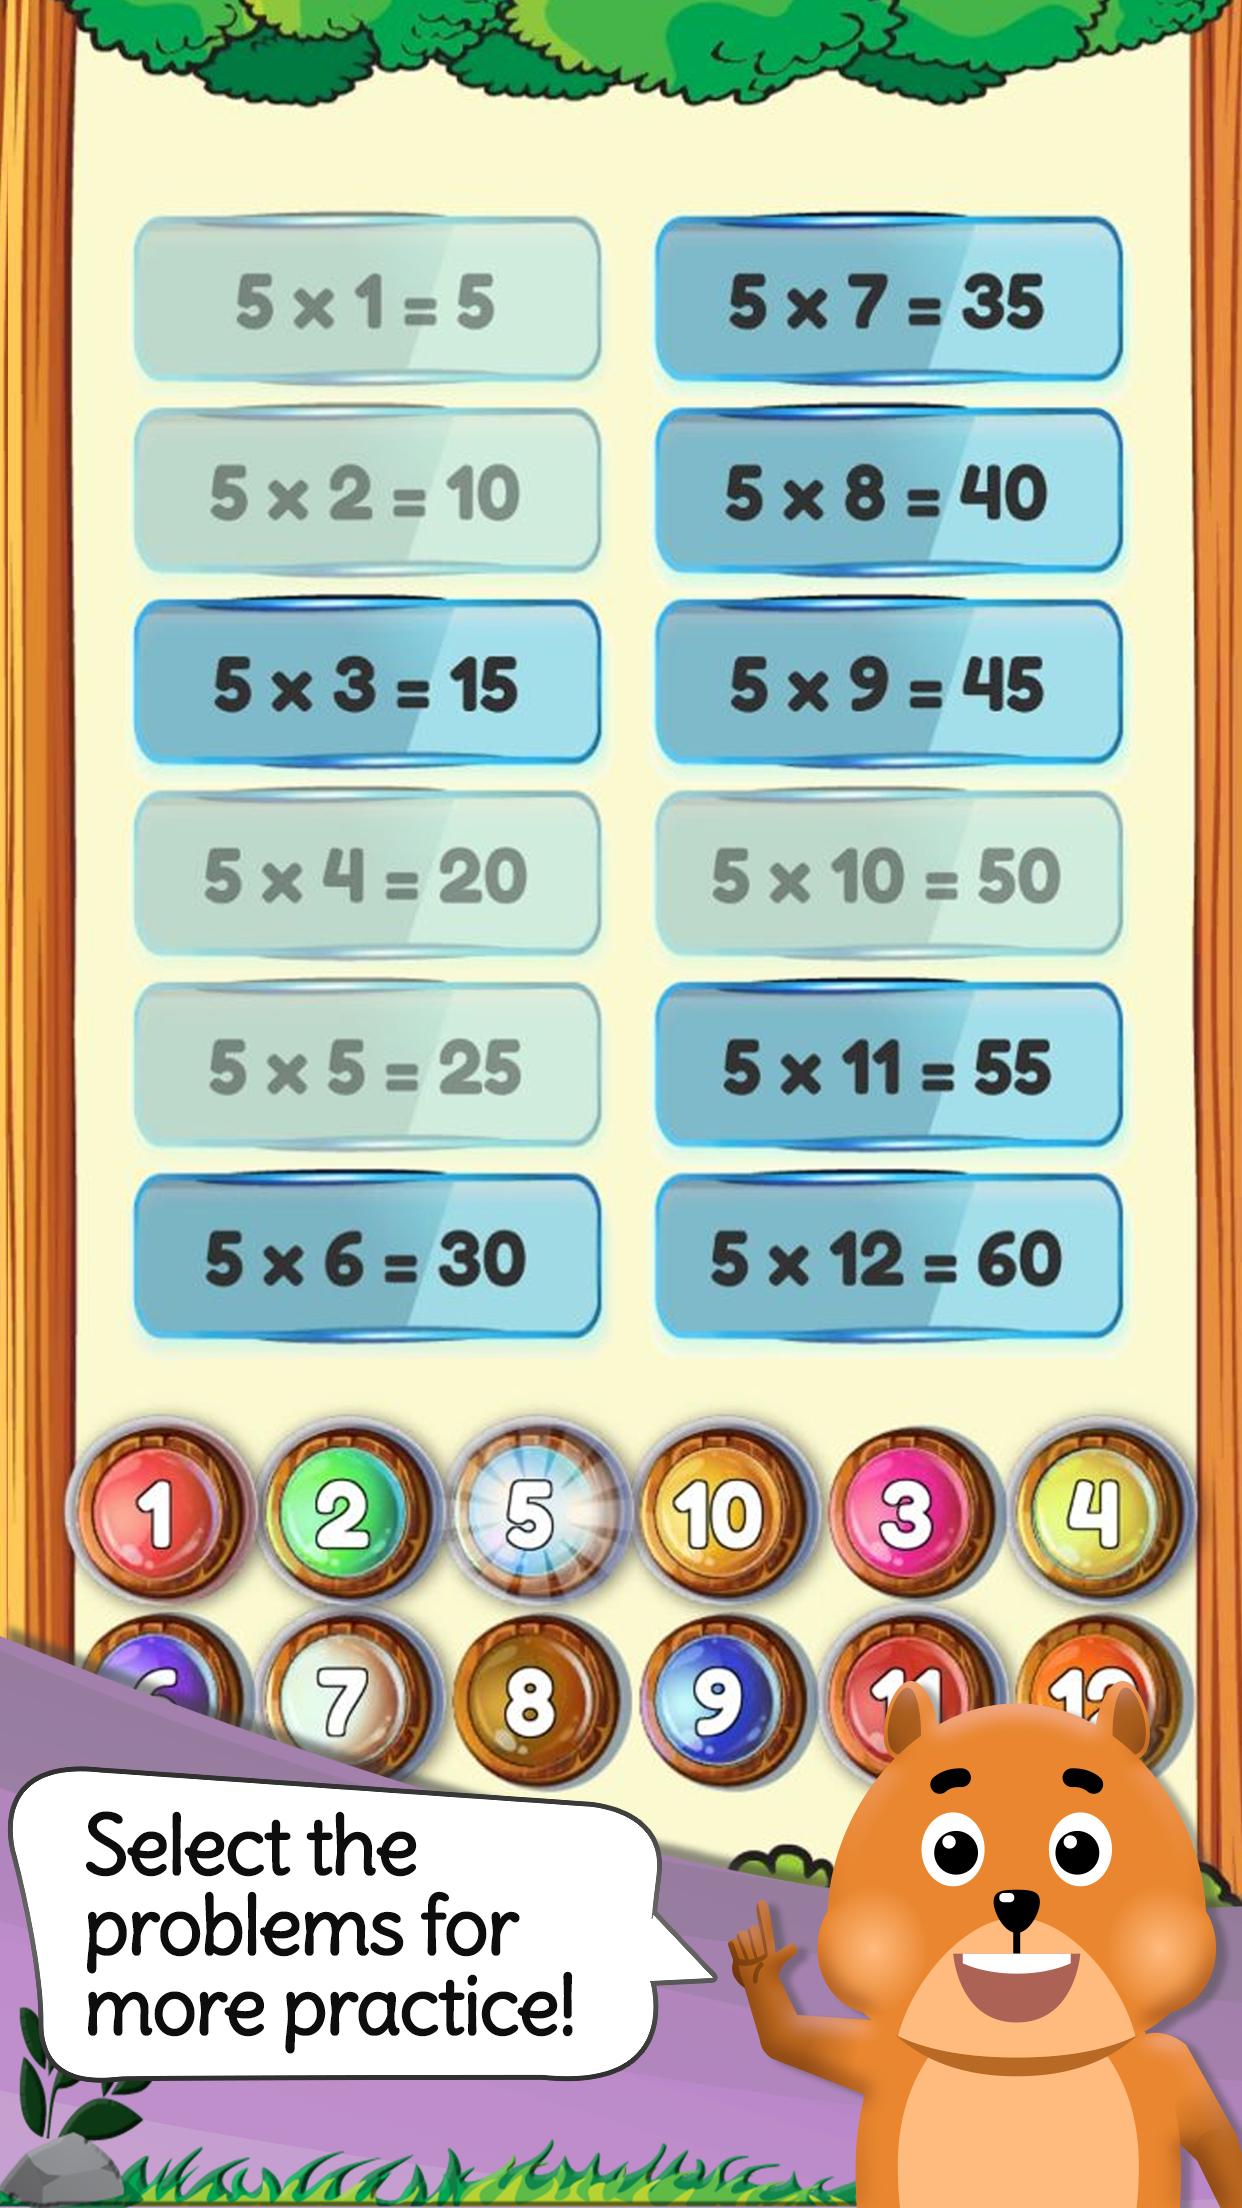 Times Tables & Friends: Free Multiplication Games 2.3.77 Screenshot 7